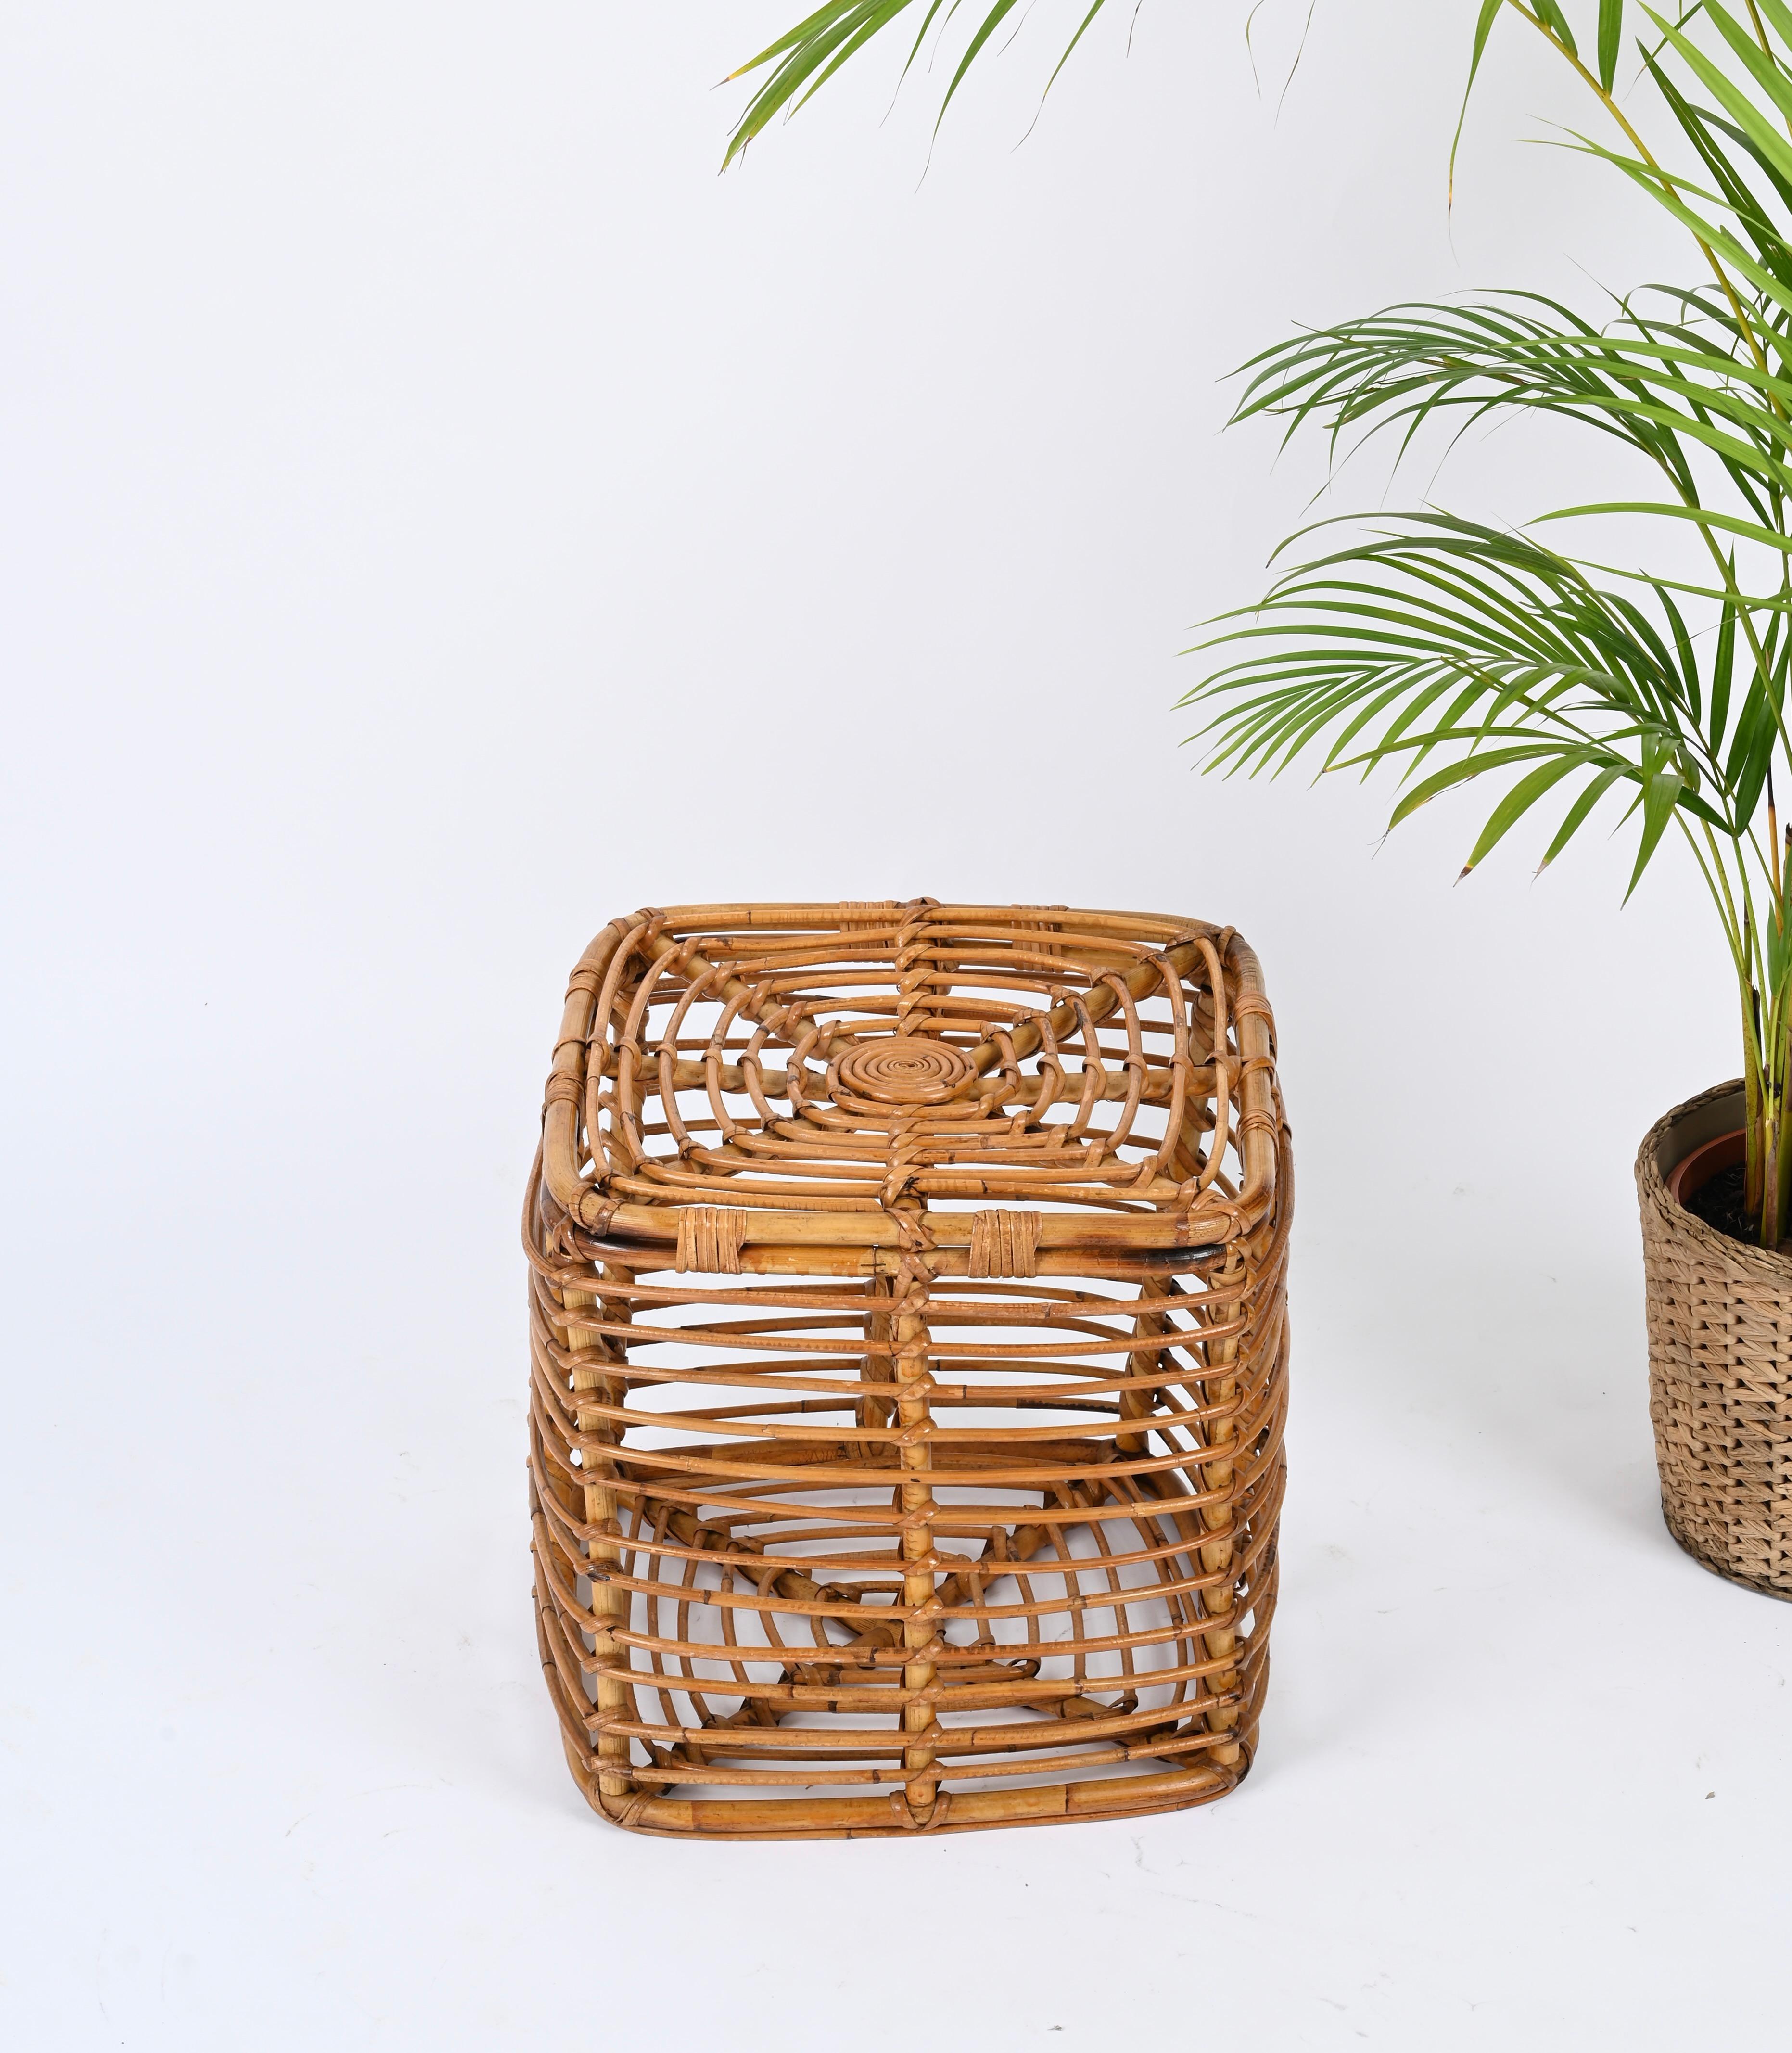 Midcentury Tito Agnoli Rattan and Wicker Square Pouf Stool, Italy, 1970s For Sale 3